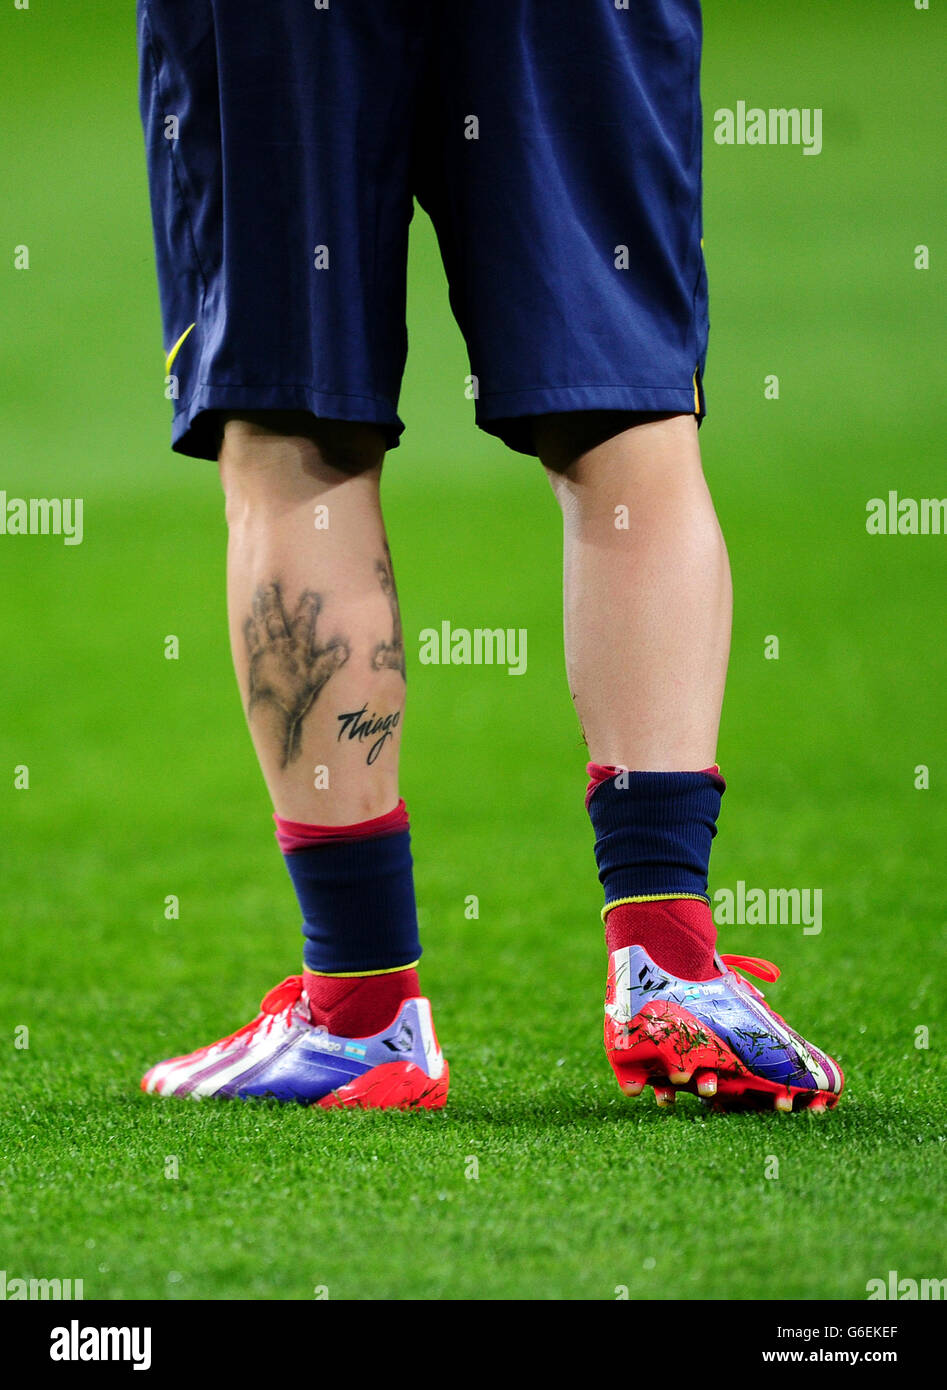 Best Football Tattoo Ideas and Designs For Football Players in 2021